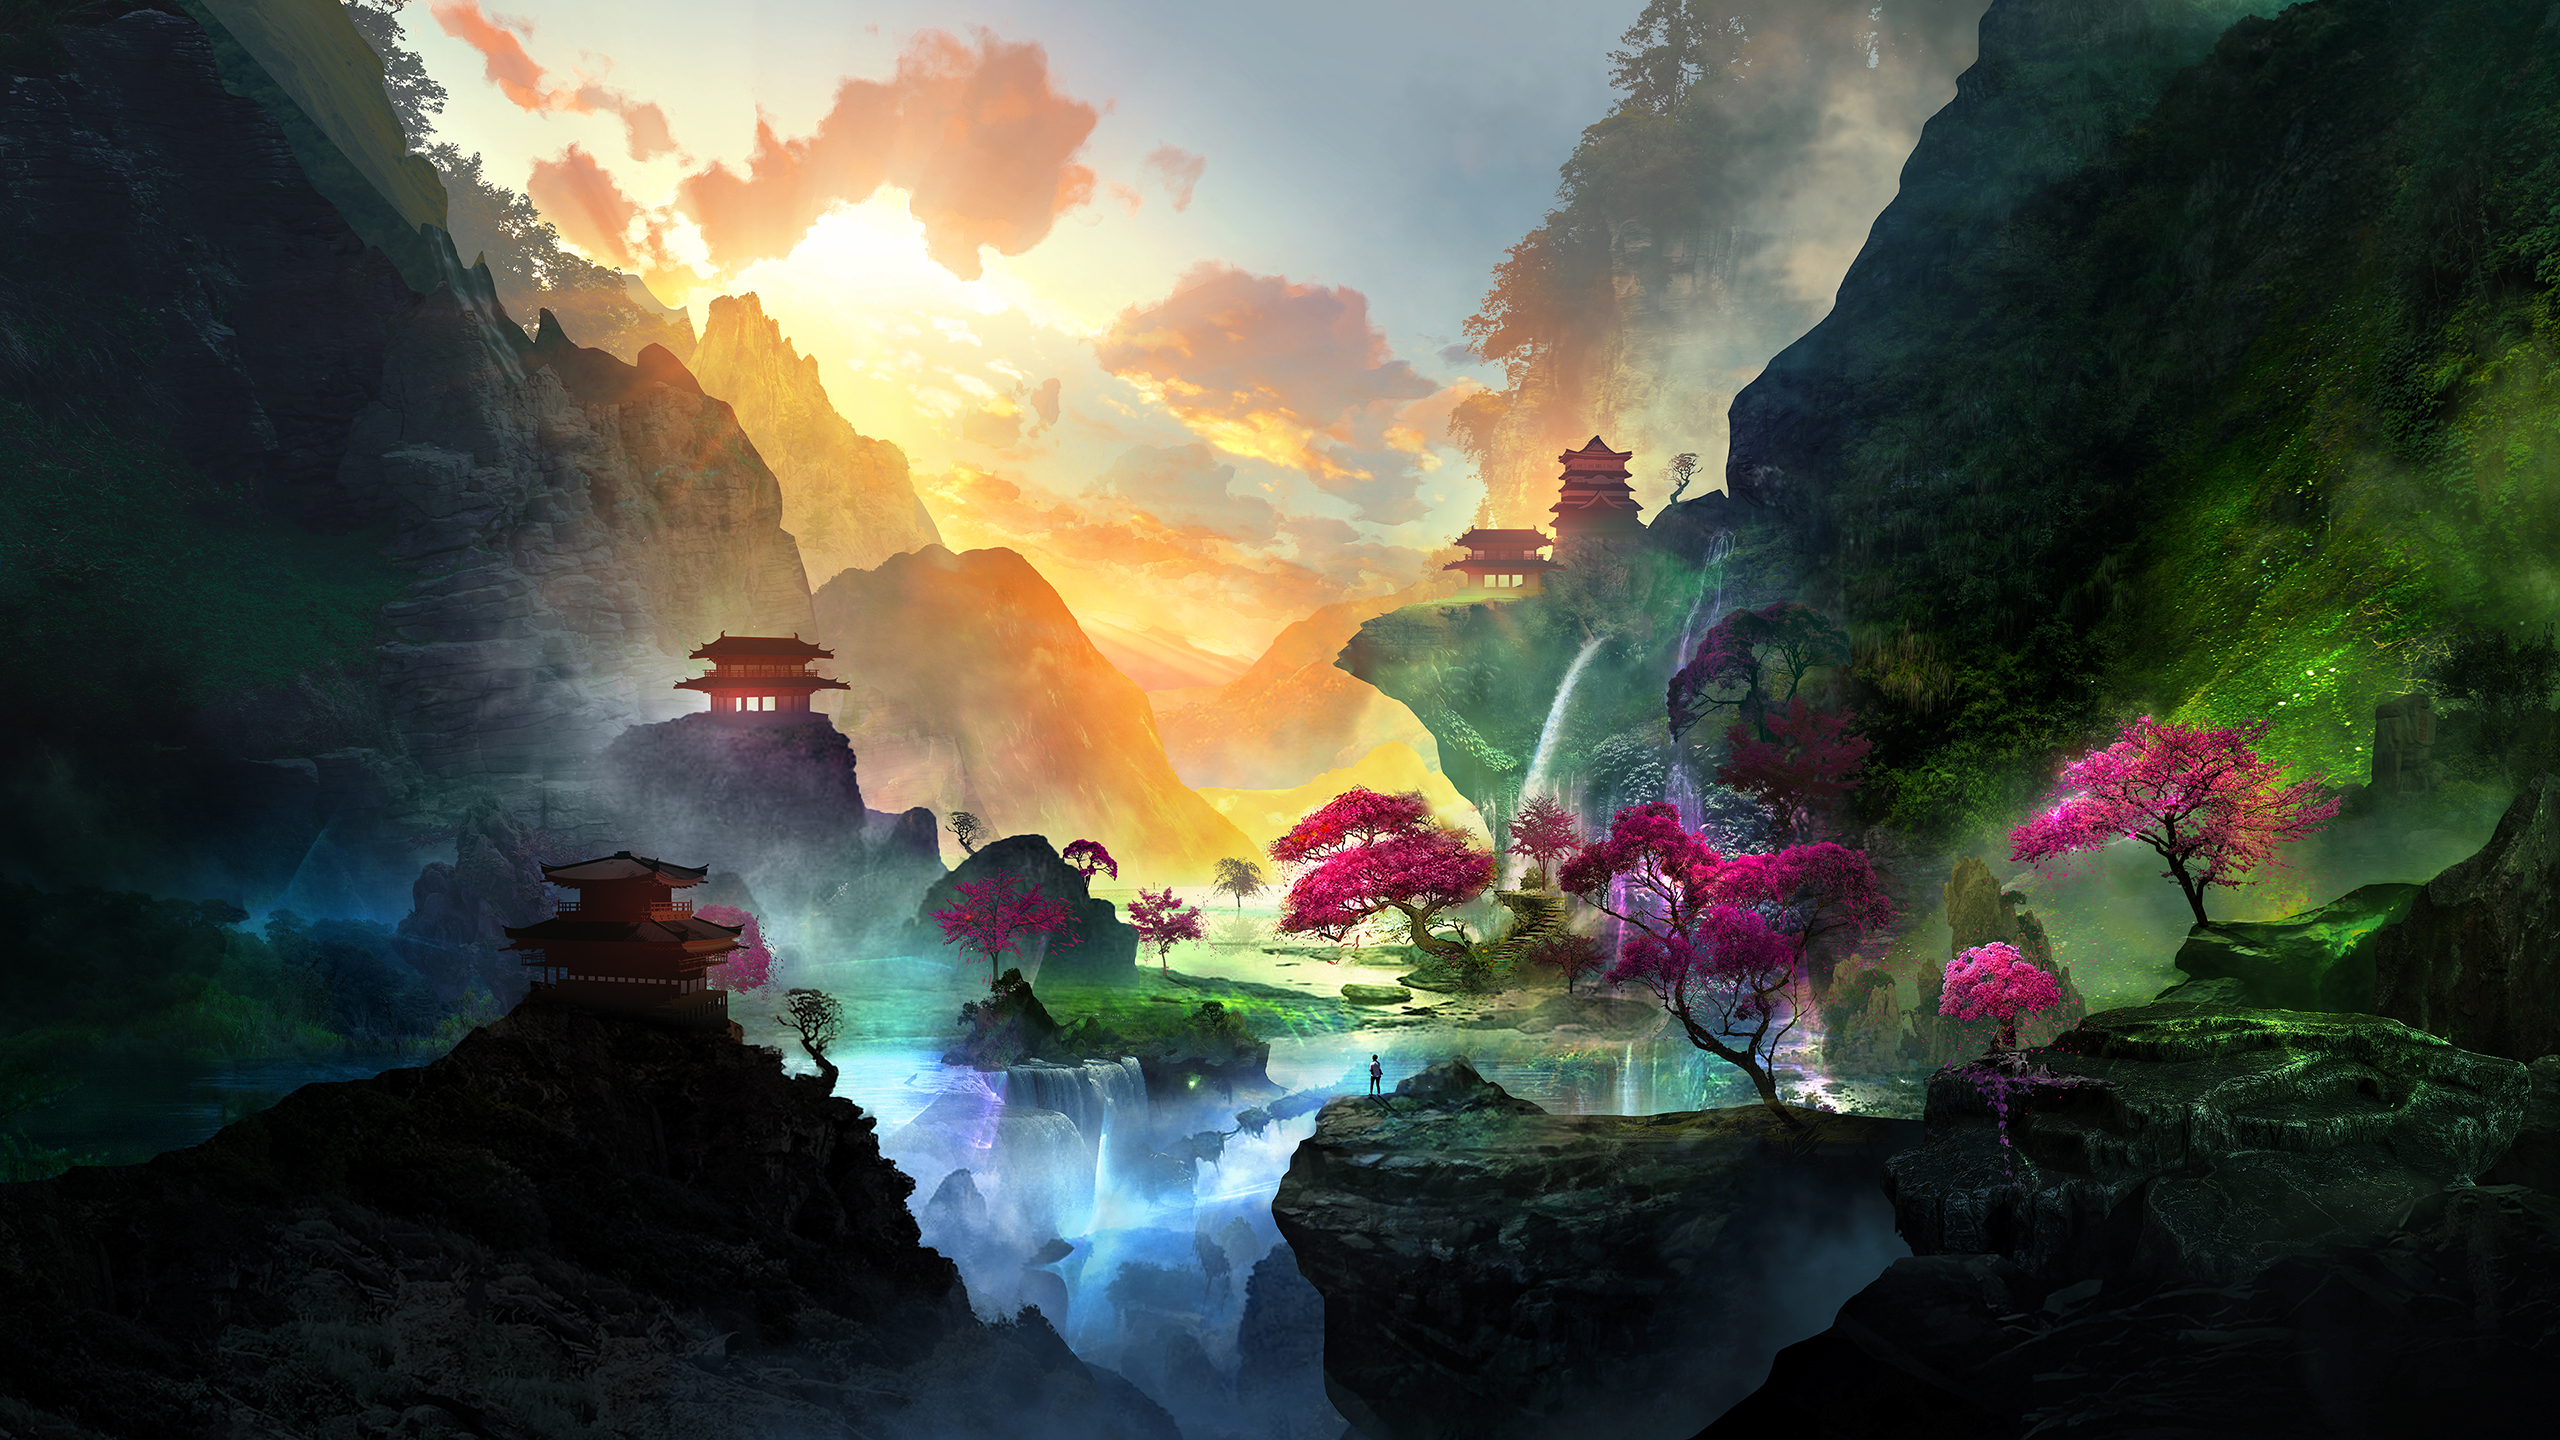 T1na Fantasy Art Landscape Mountains Waterfall Trees 2560x1440